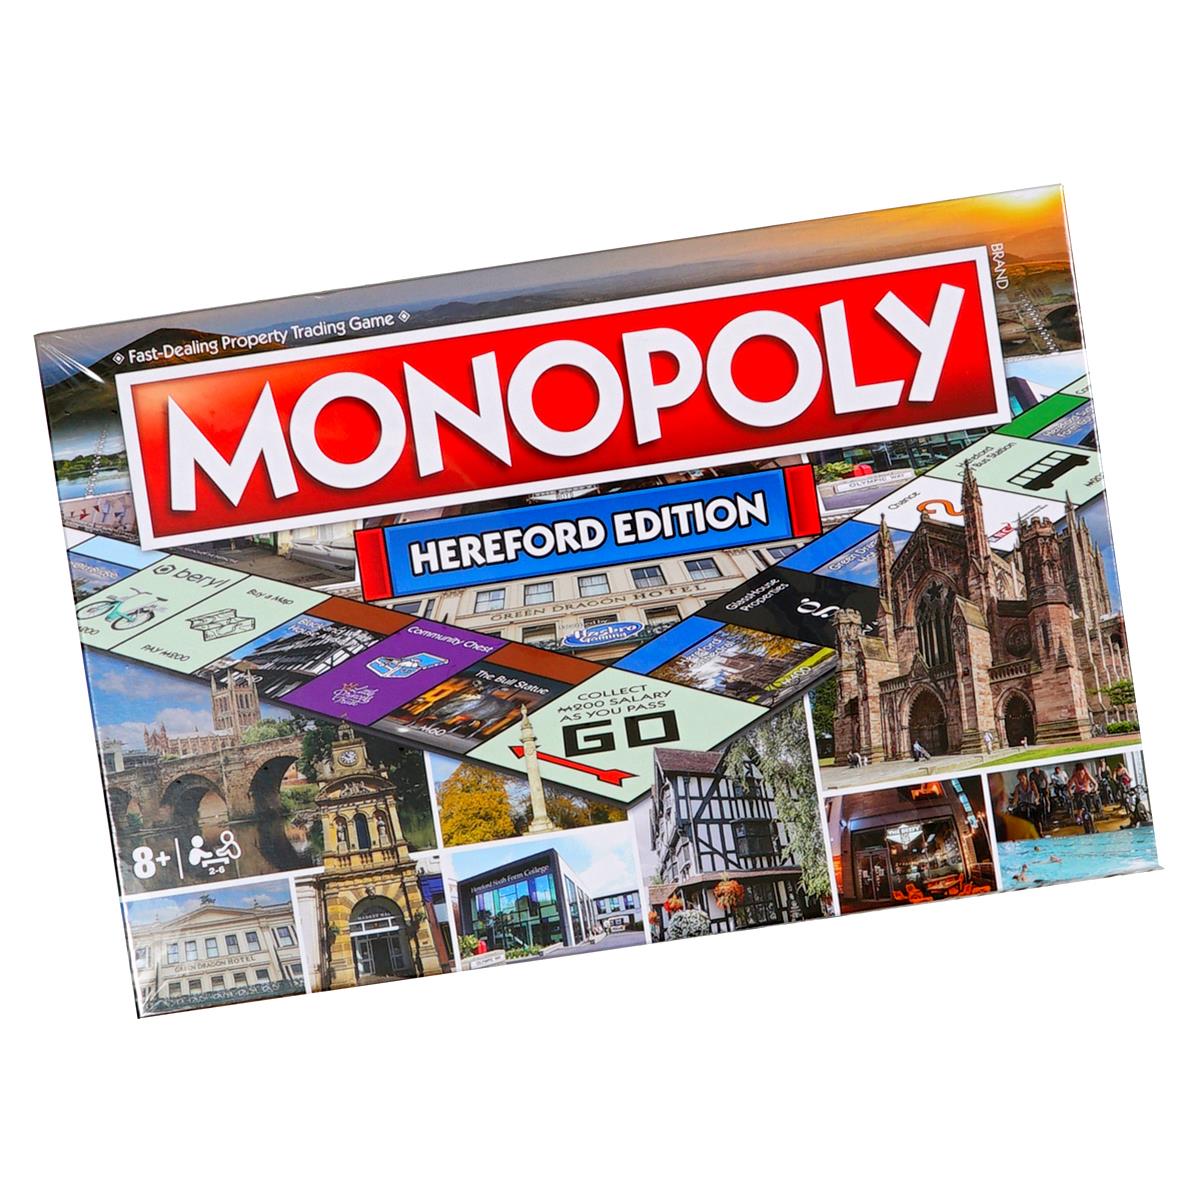 Which football team is featured in the Hereford Monopoly board game?